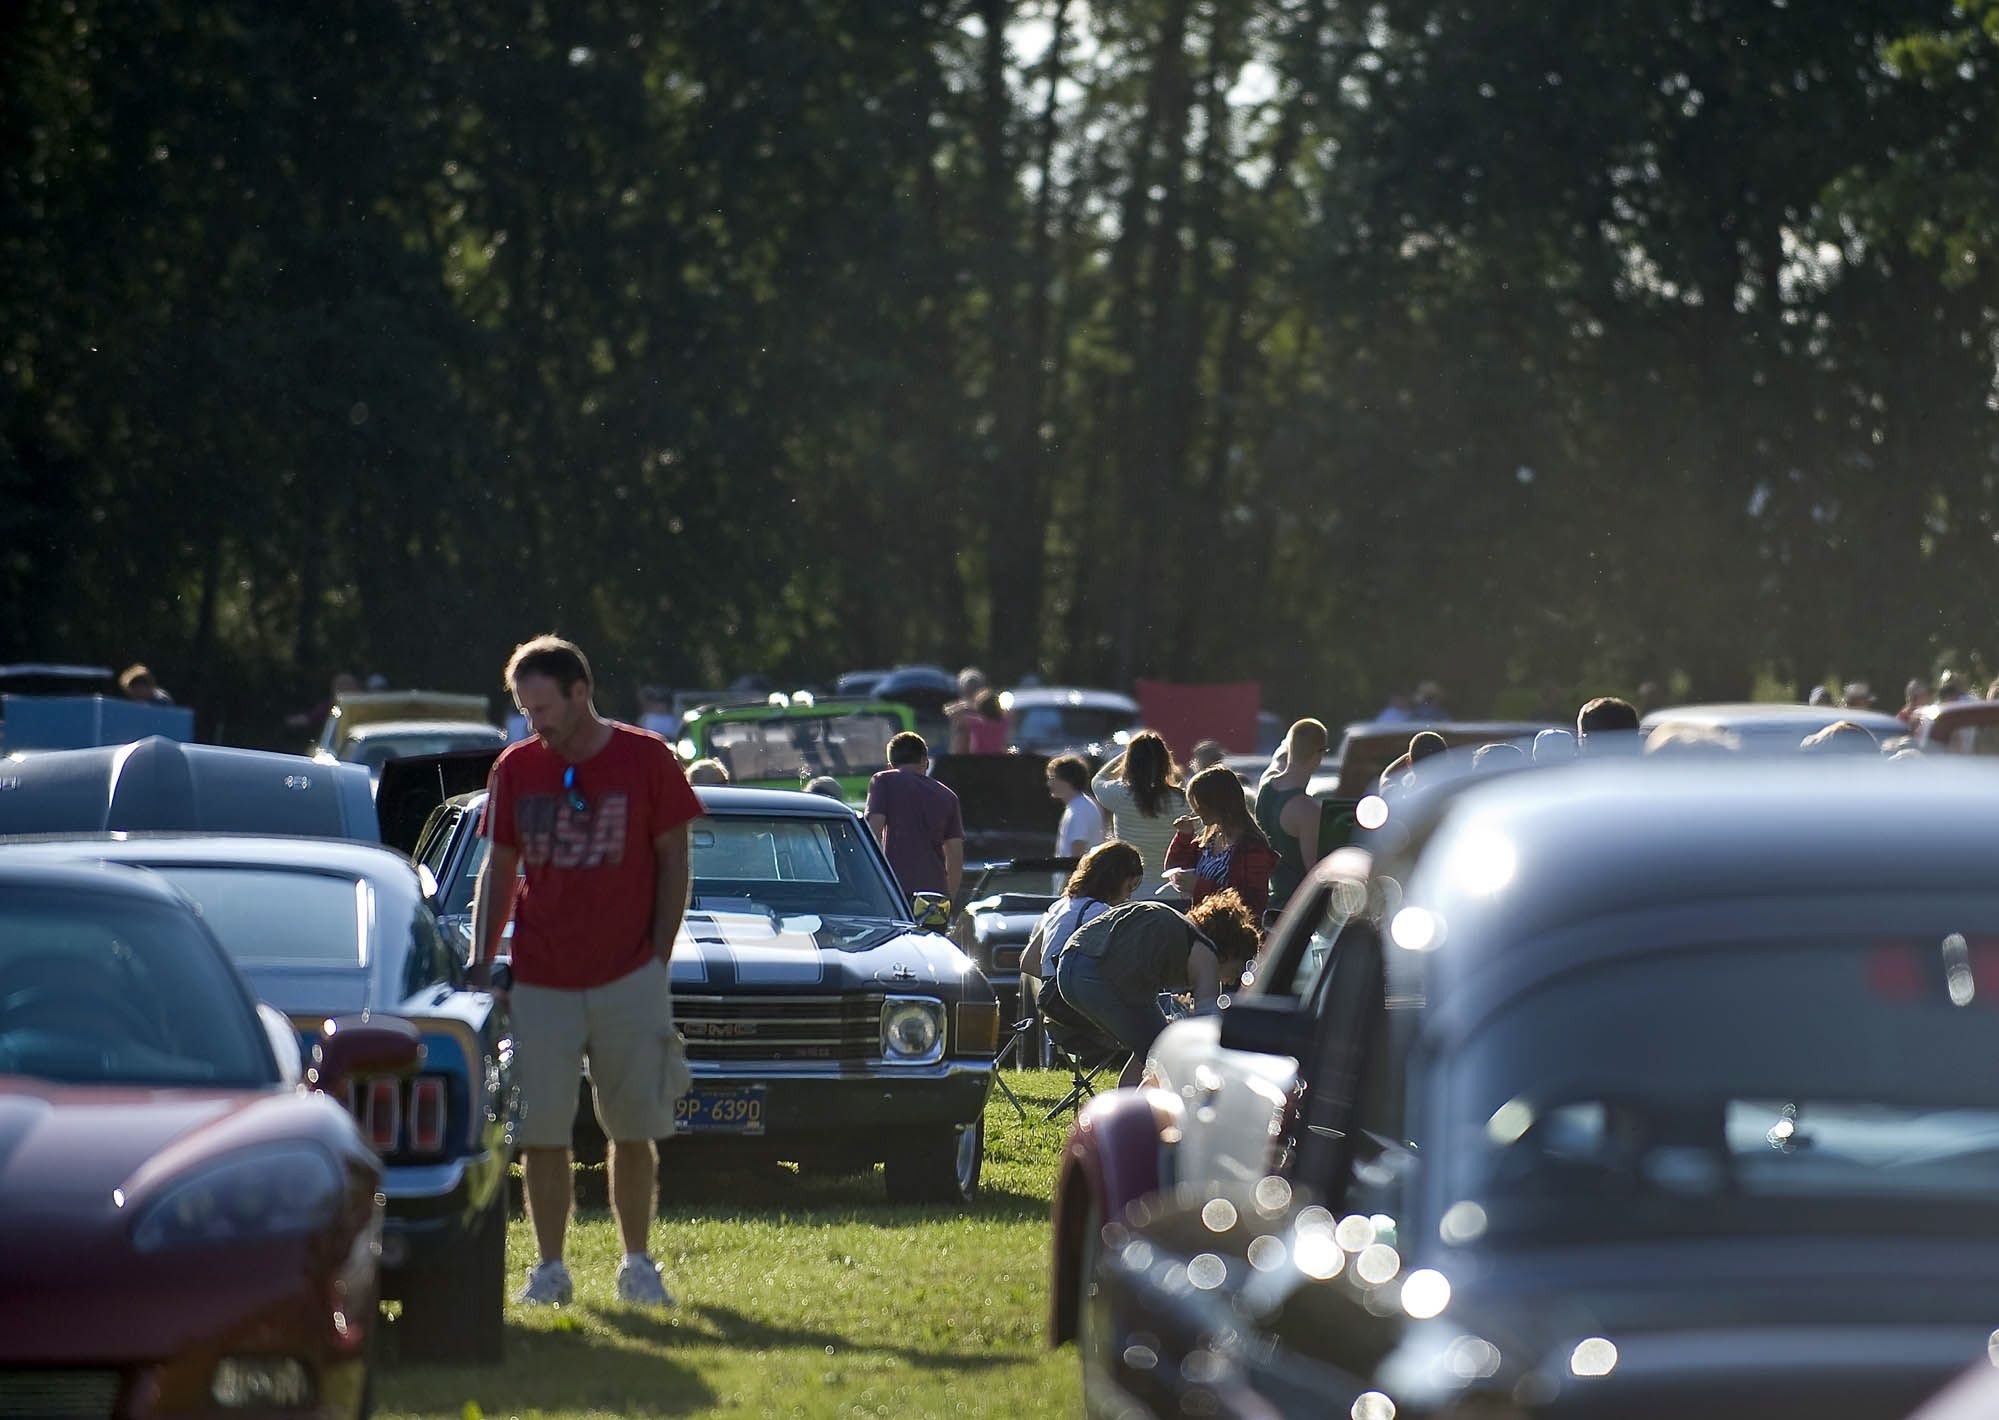 A crowd admires hundreds of vintage and contemporary vehicles Wednesday at the Beaches Summertime Cruisin' at Portland International Raceway.